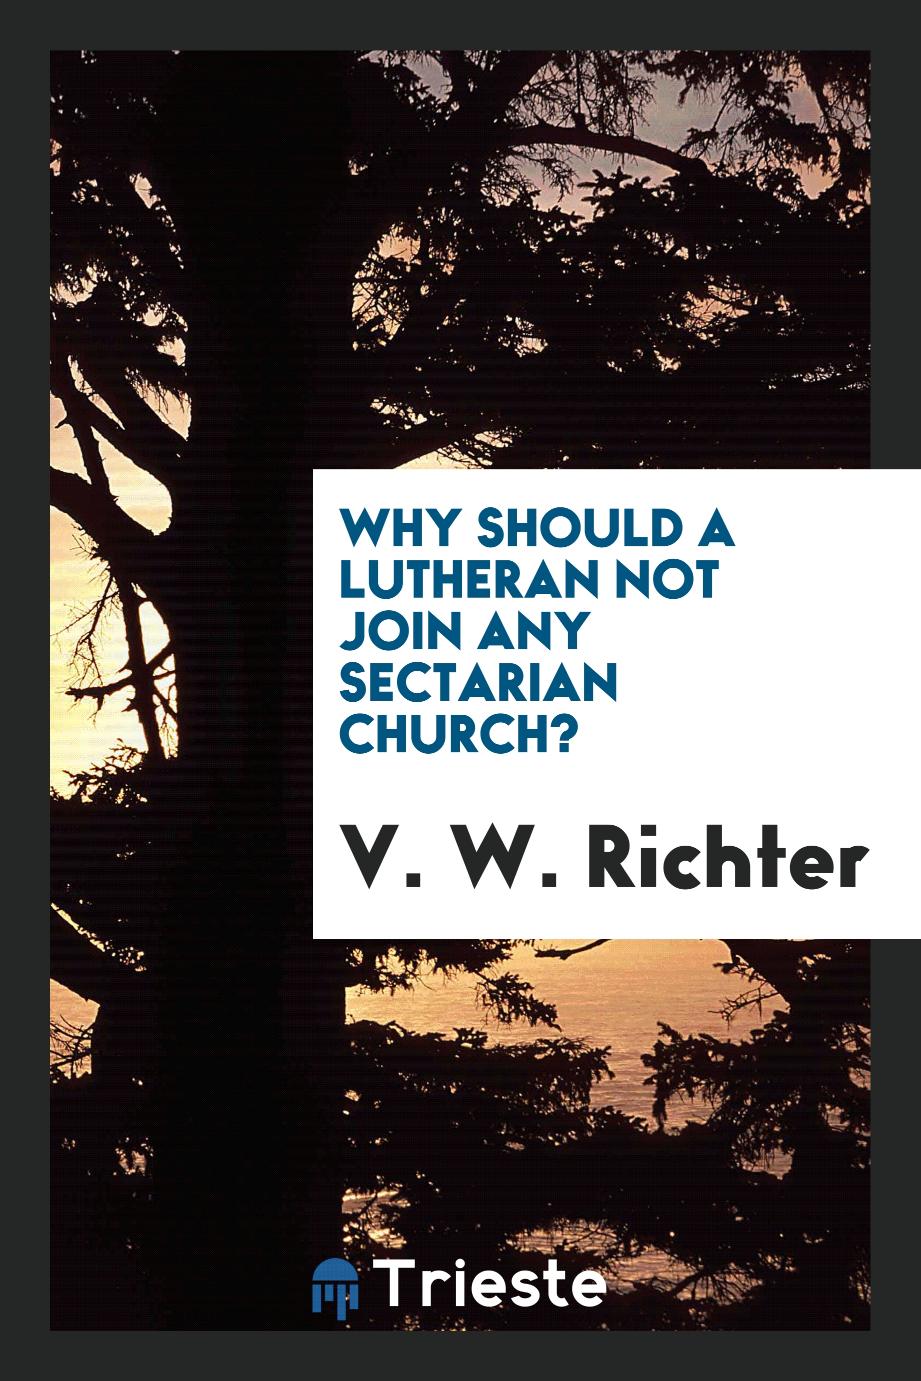 Why Should a Lutheran Not Join Any Sectarian Church?